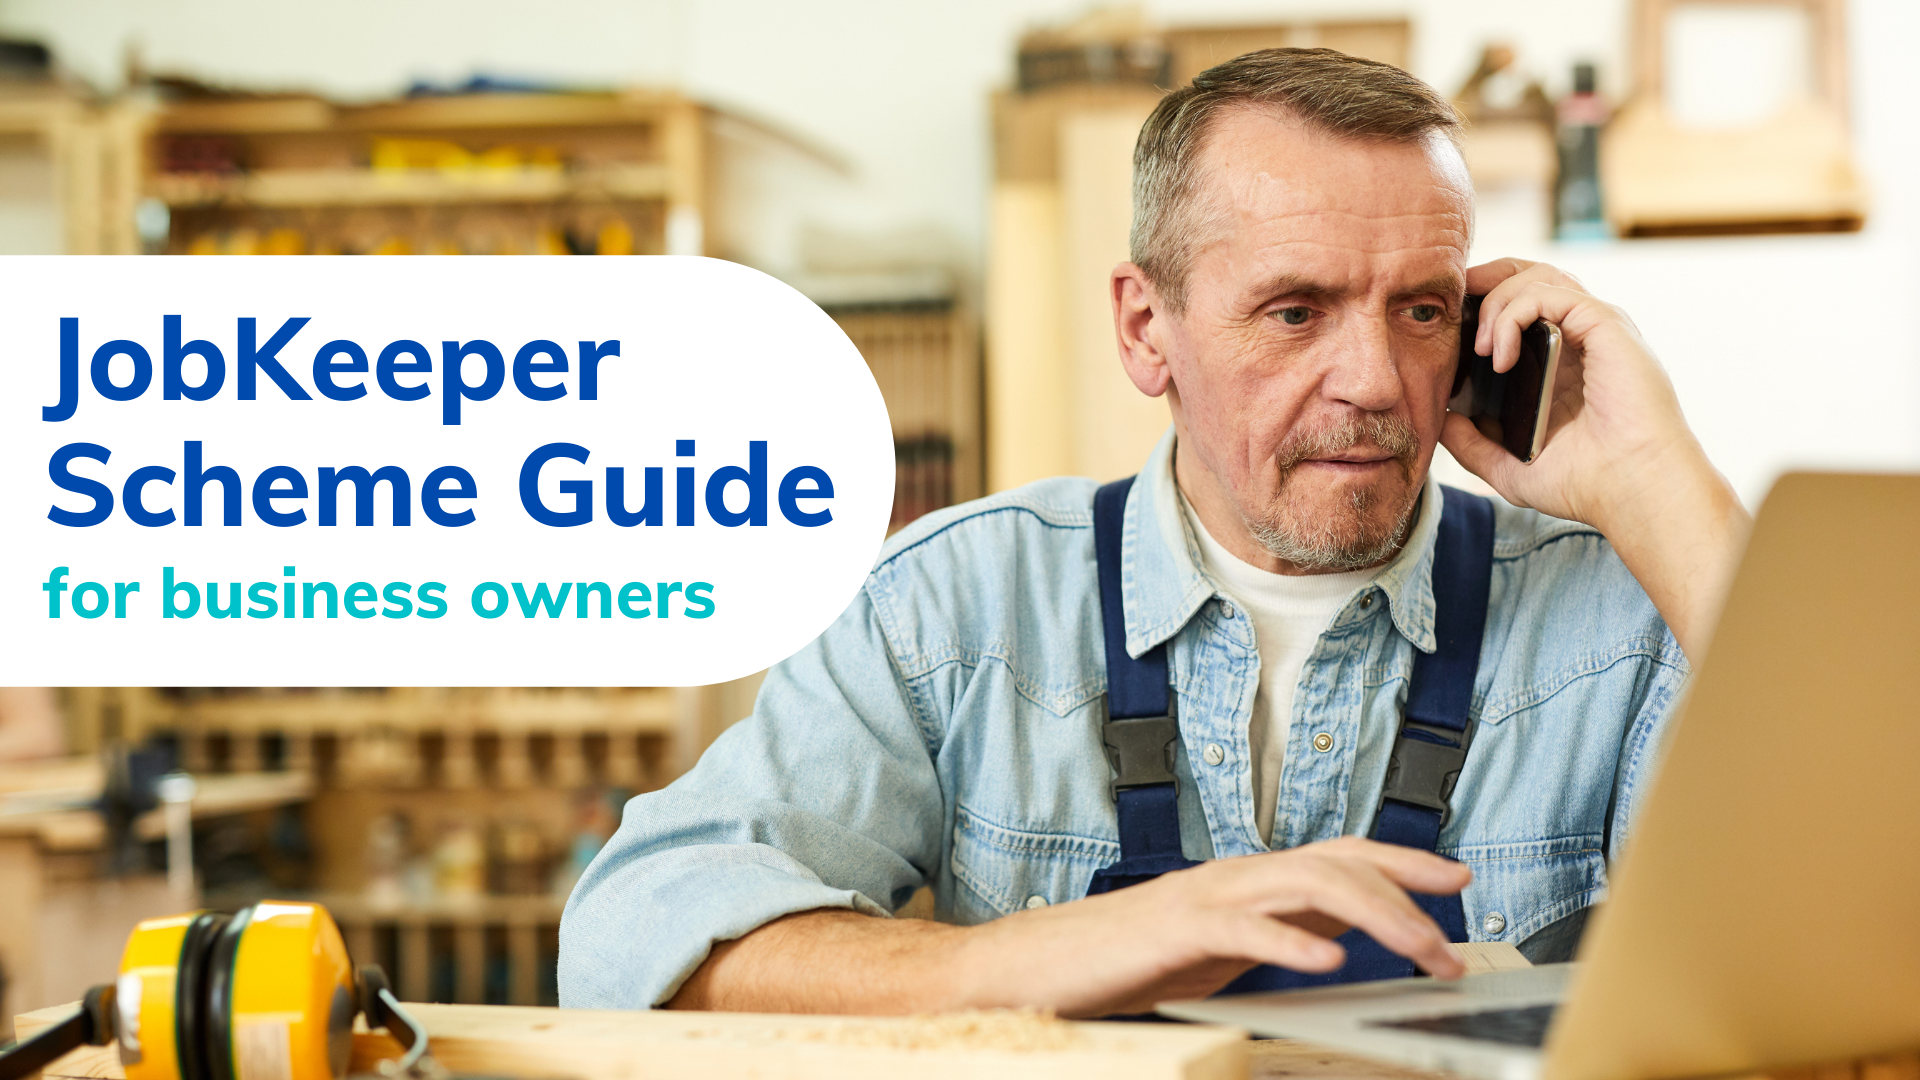 Jobkeeper Scheme Guide for business owners.